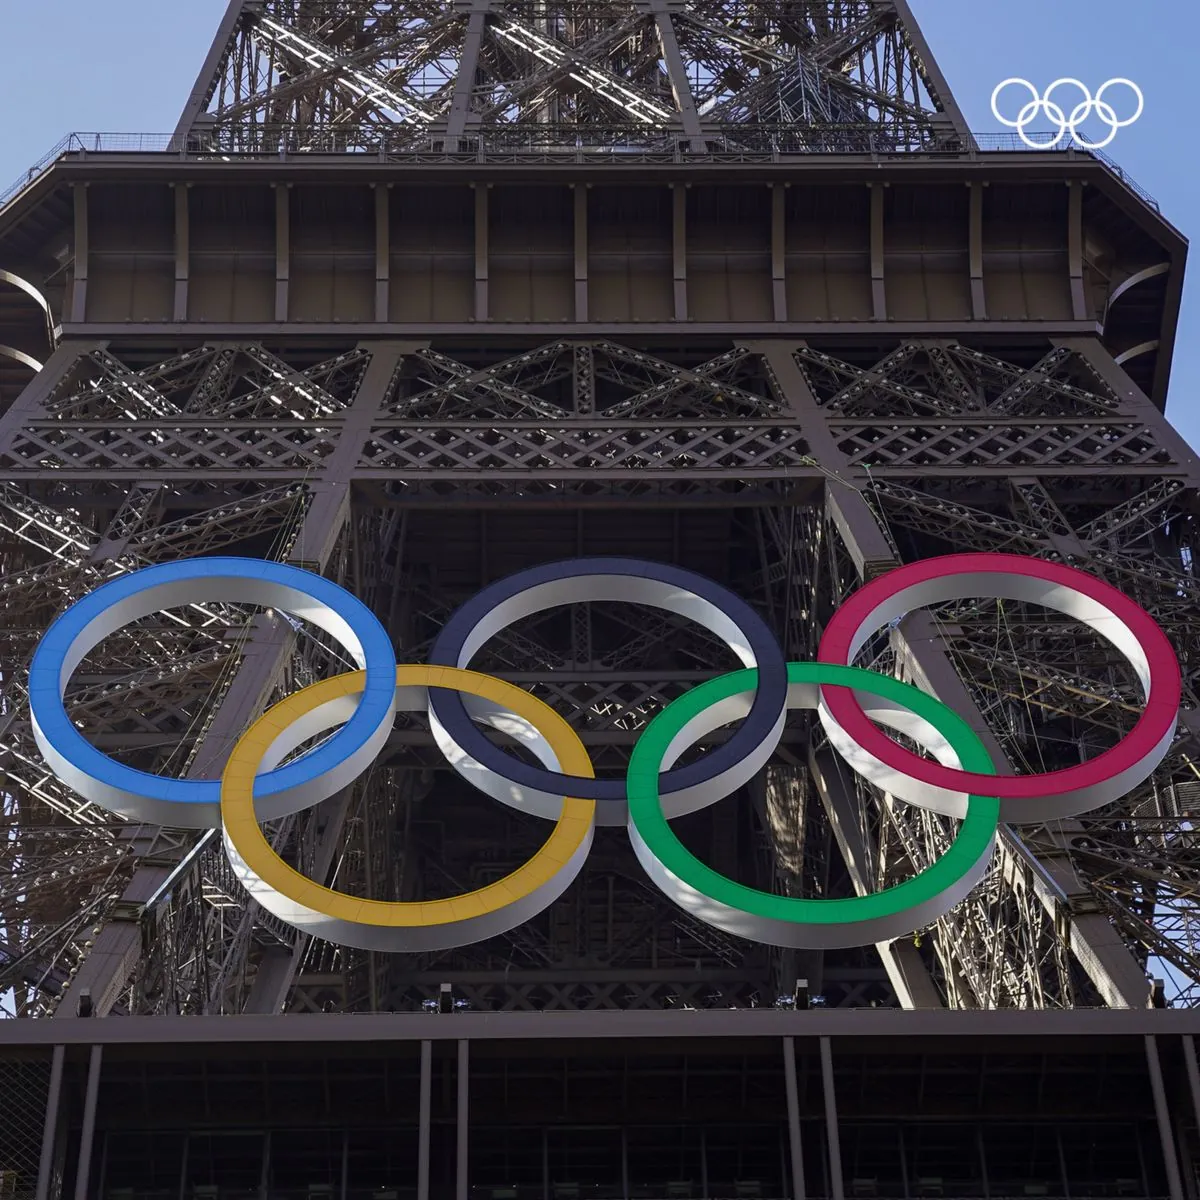 An installation of Olympic rings was installed on the Eiffel Tower